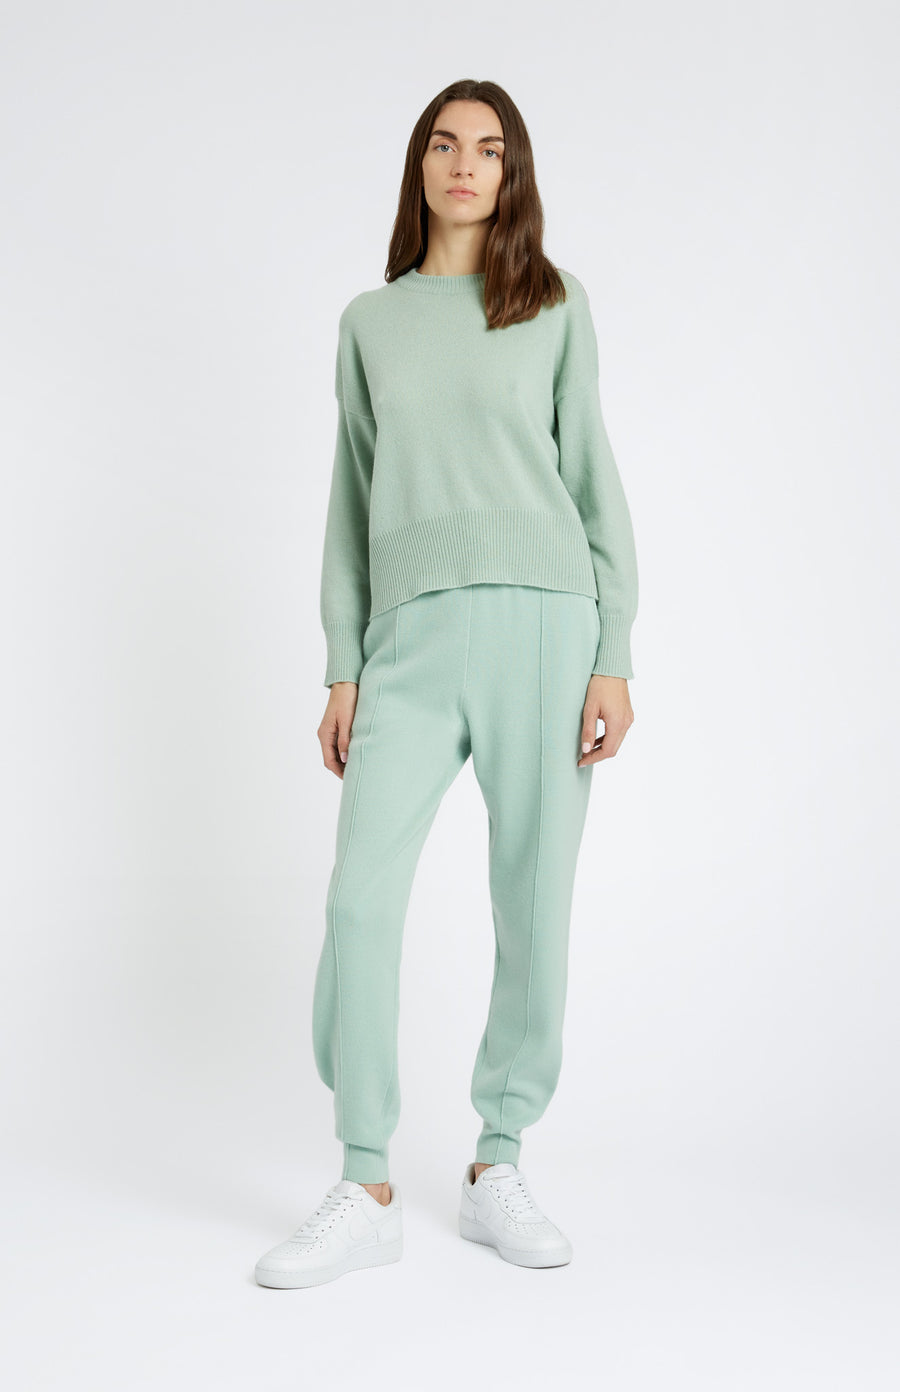 Pringle of Scotland Lightweight Round Neck Cashmere jumper in Aniseed with matching joggers